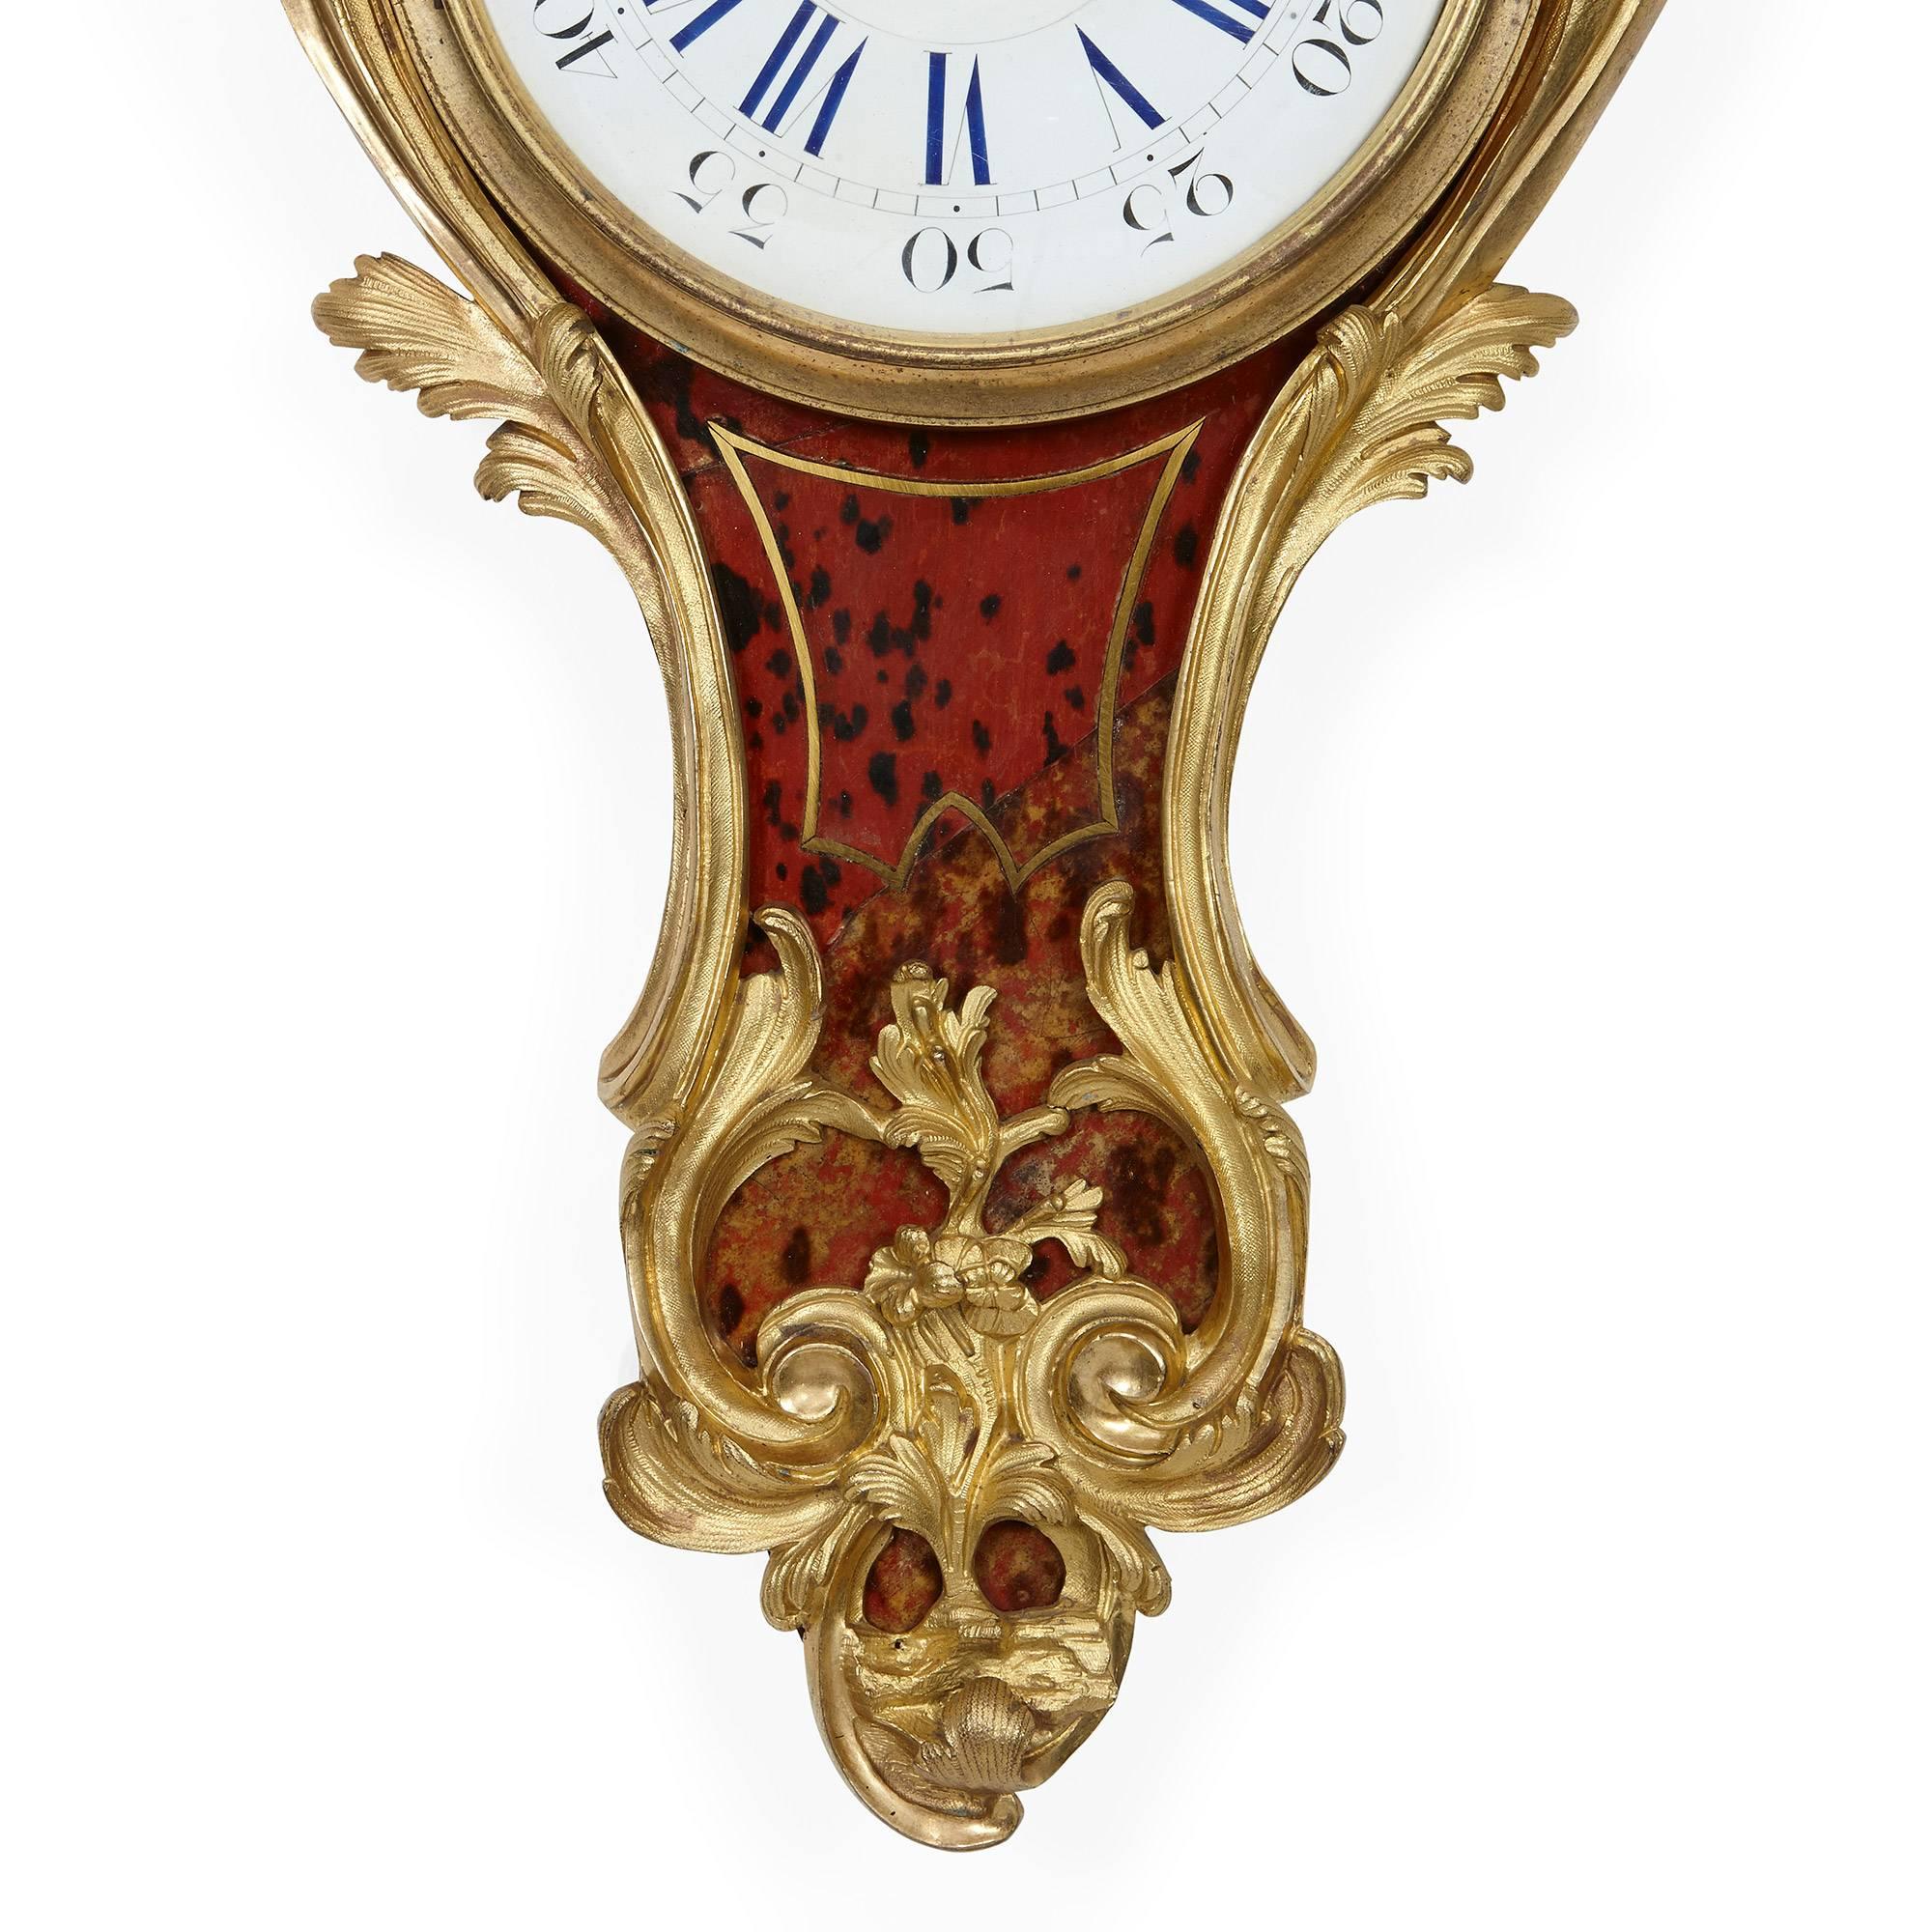 19th Century Louis XV Style Ormolu-Mounted Tortoiseshell Clock and Barometer Set by Gleizes For Sale